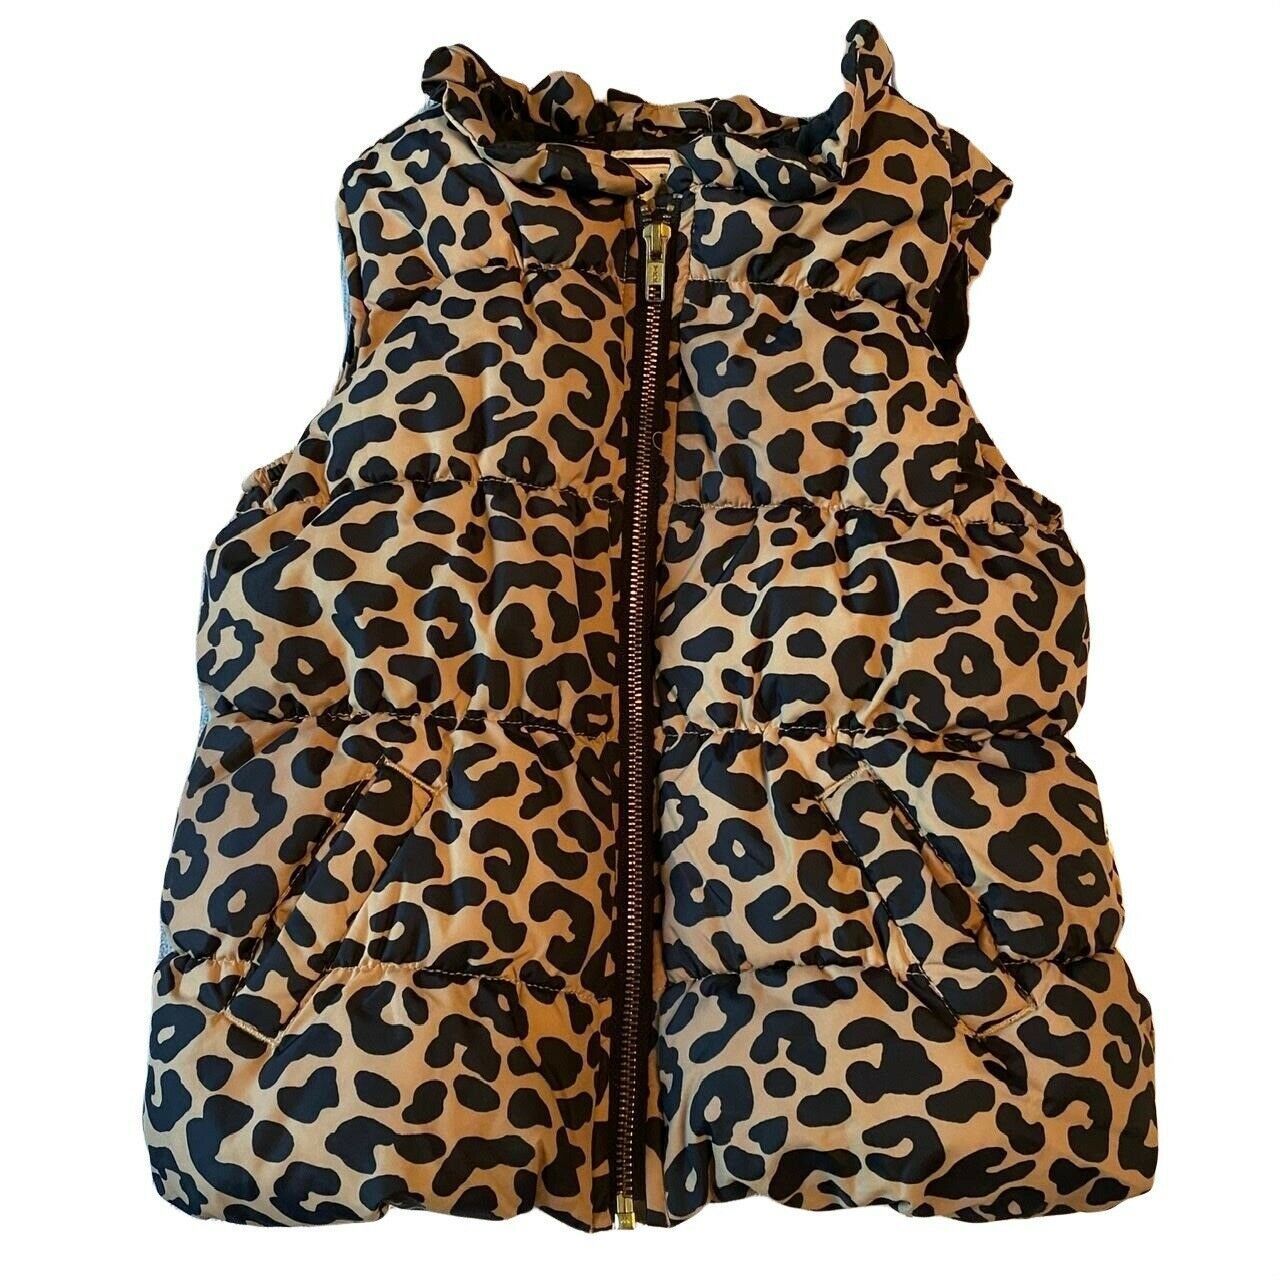 Primary image for Gymboree Cheetah Print Girls Puffer Vest Sz 5/6 (Small)